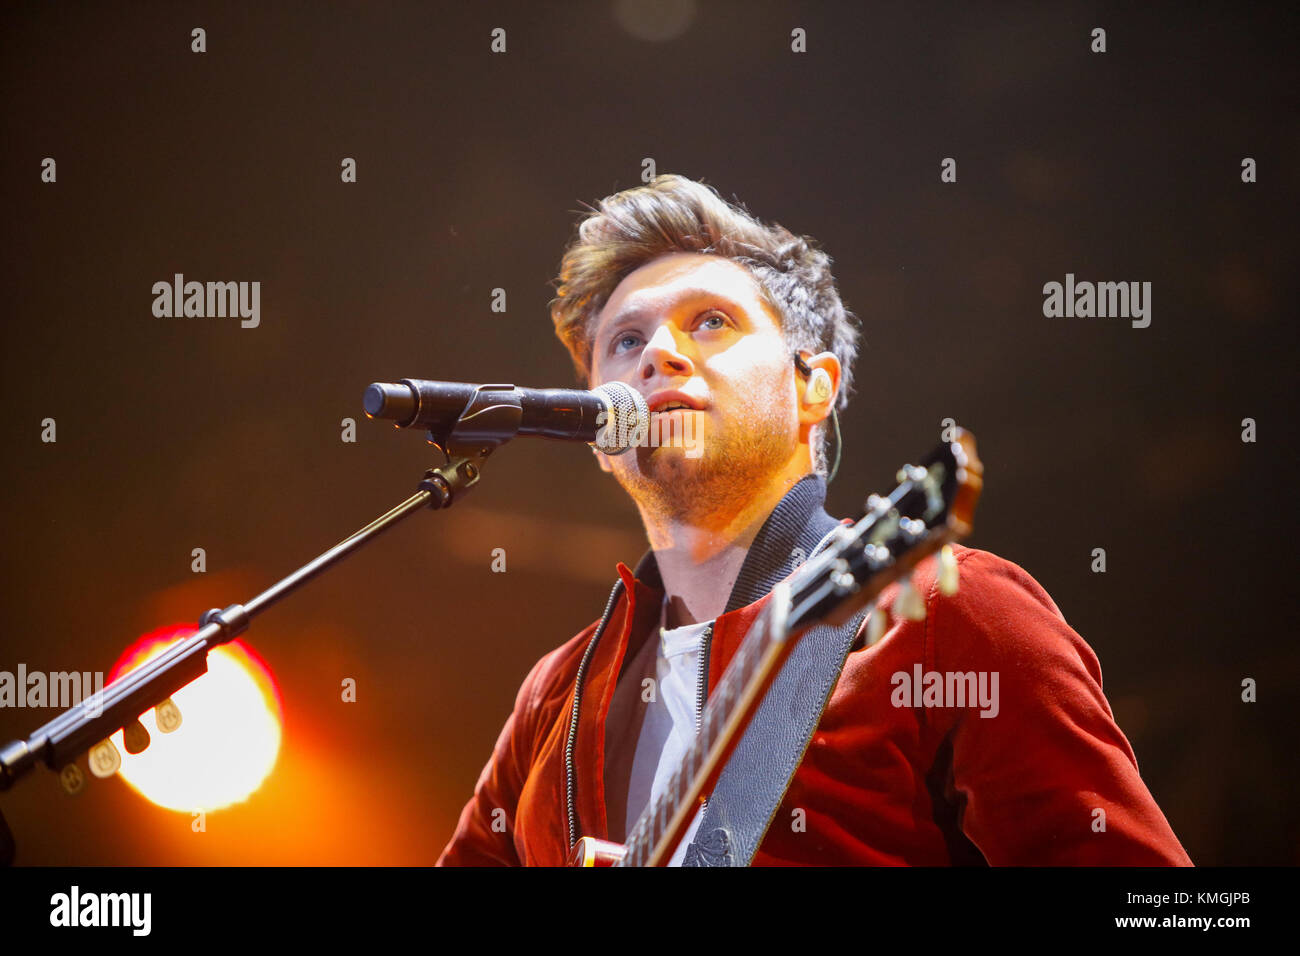 Philadelphia, USA. 06th Dec, 2017. Niall Horan performs at the Q102 Jingle Ball 2017 at the Wells Fargo Center in Philadelphia, PA on December 6th, 2017 Credit: The Photo Access/Alamy Live News Stock Photo